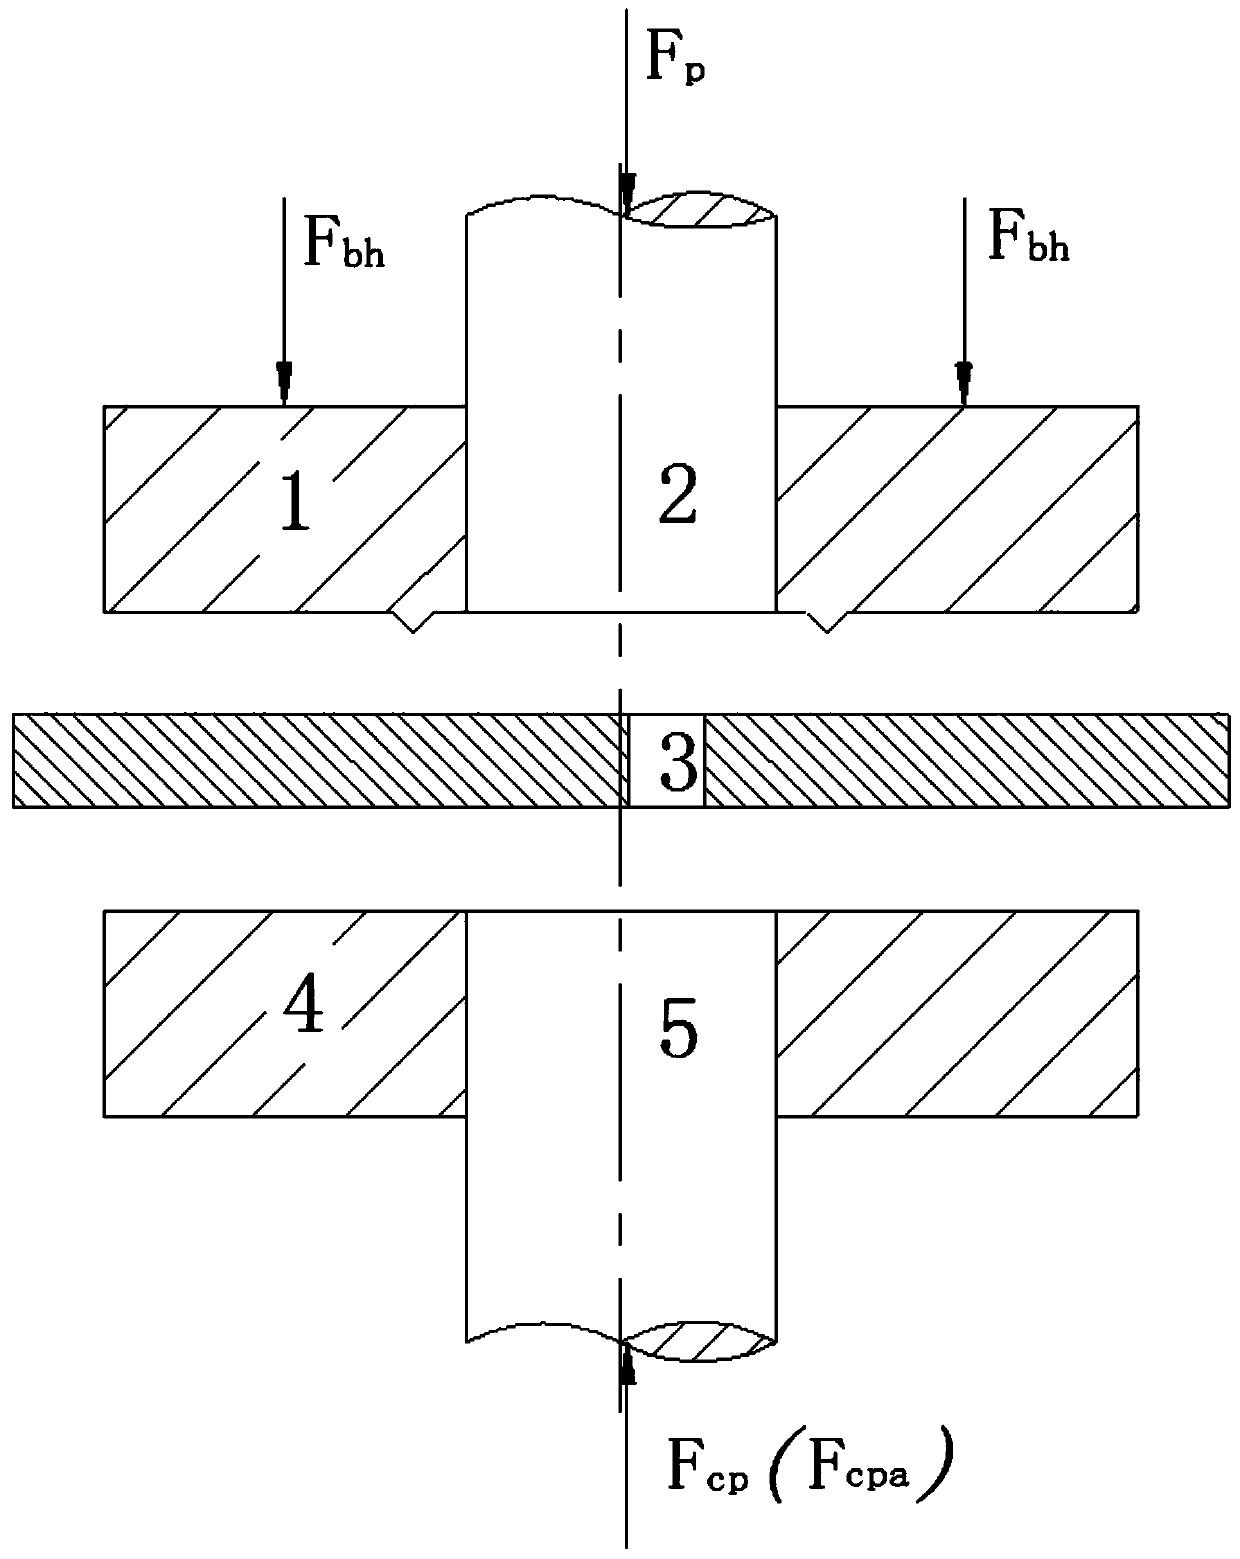 Plasticized fine blanking forming process based on crack initiation control